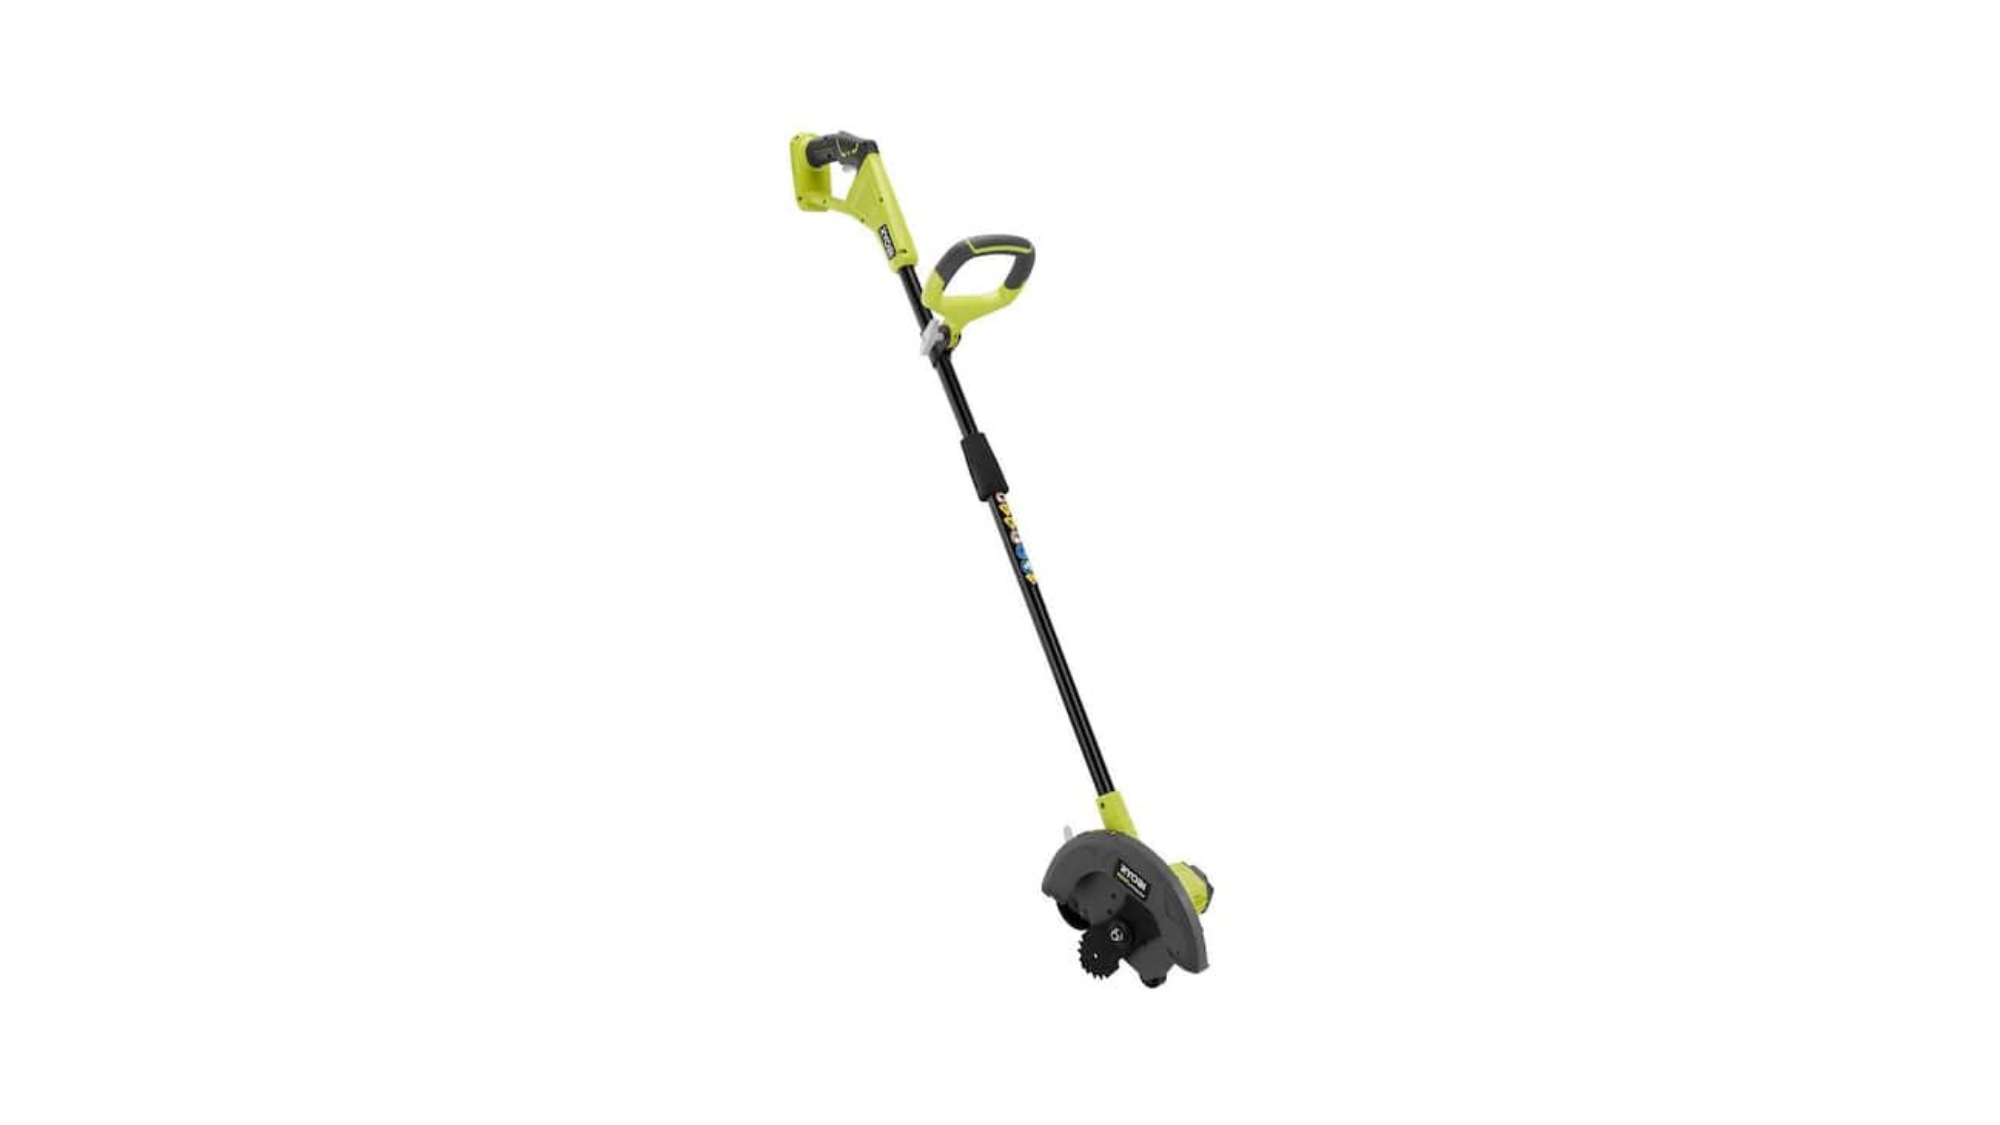 The Ryobi ONE+ electric lawn edger on a white background